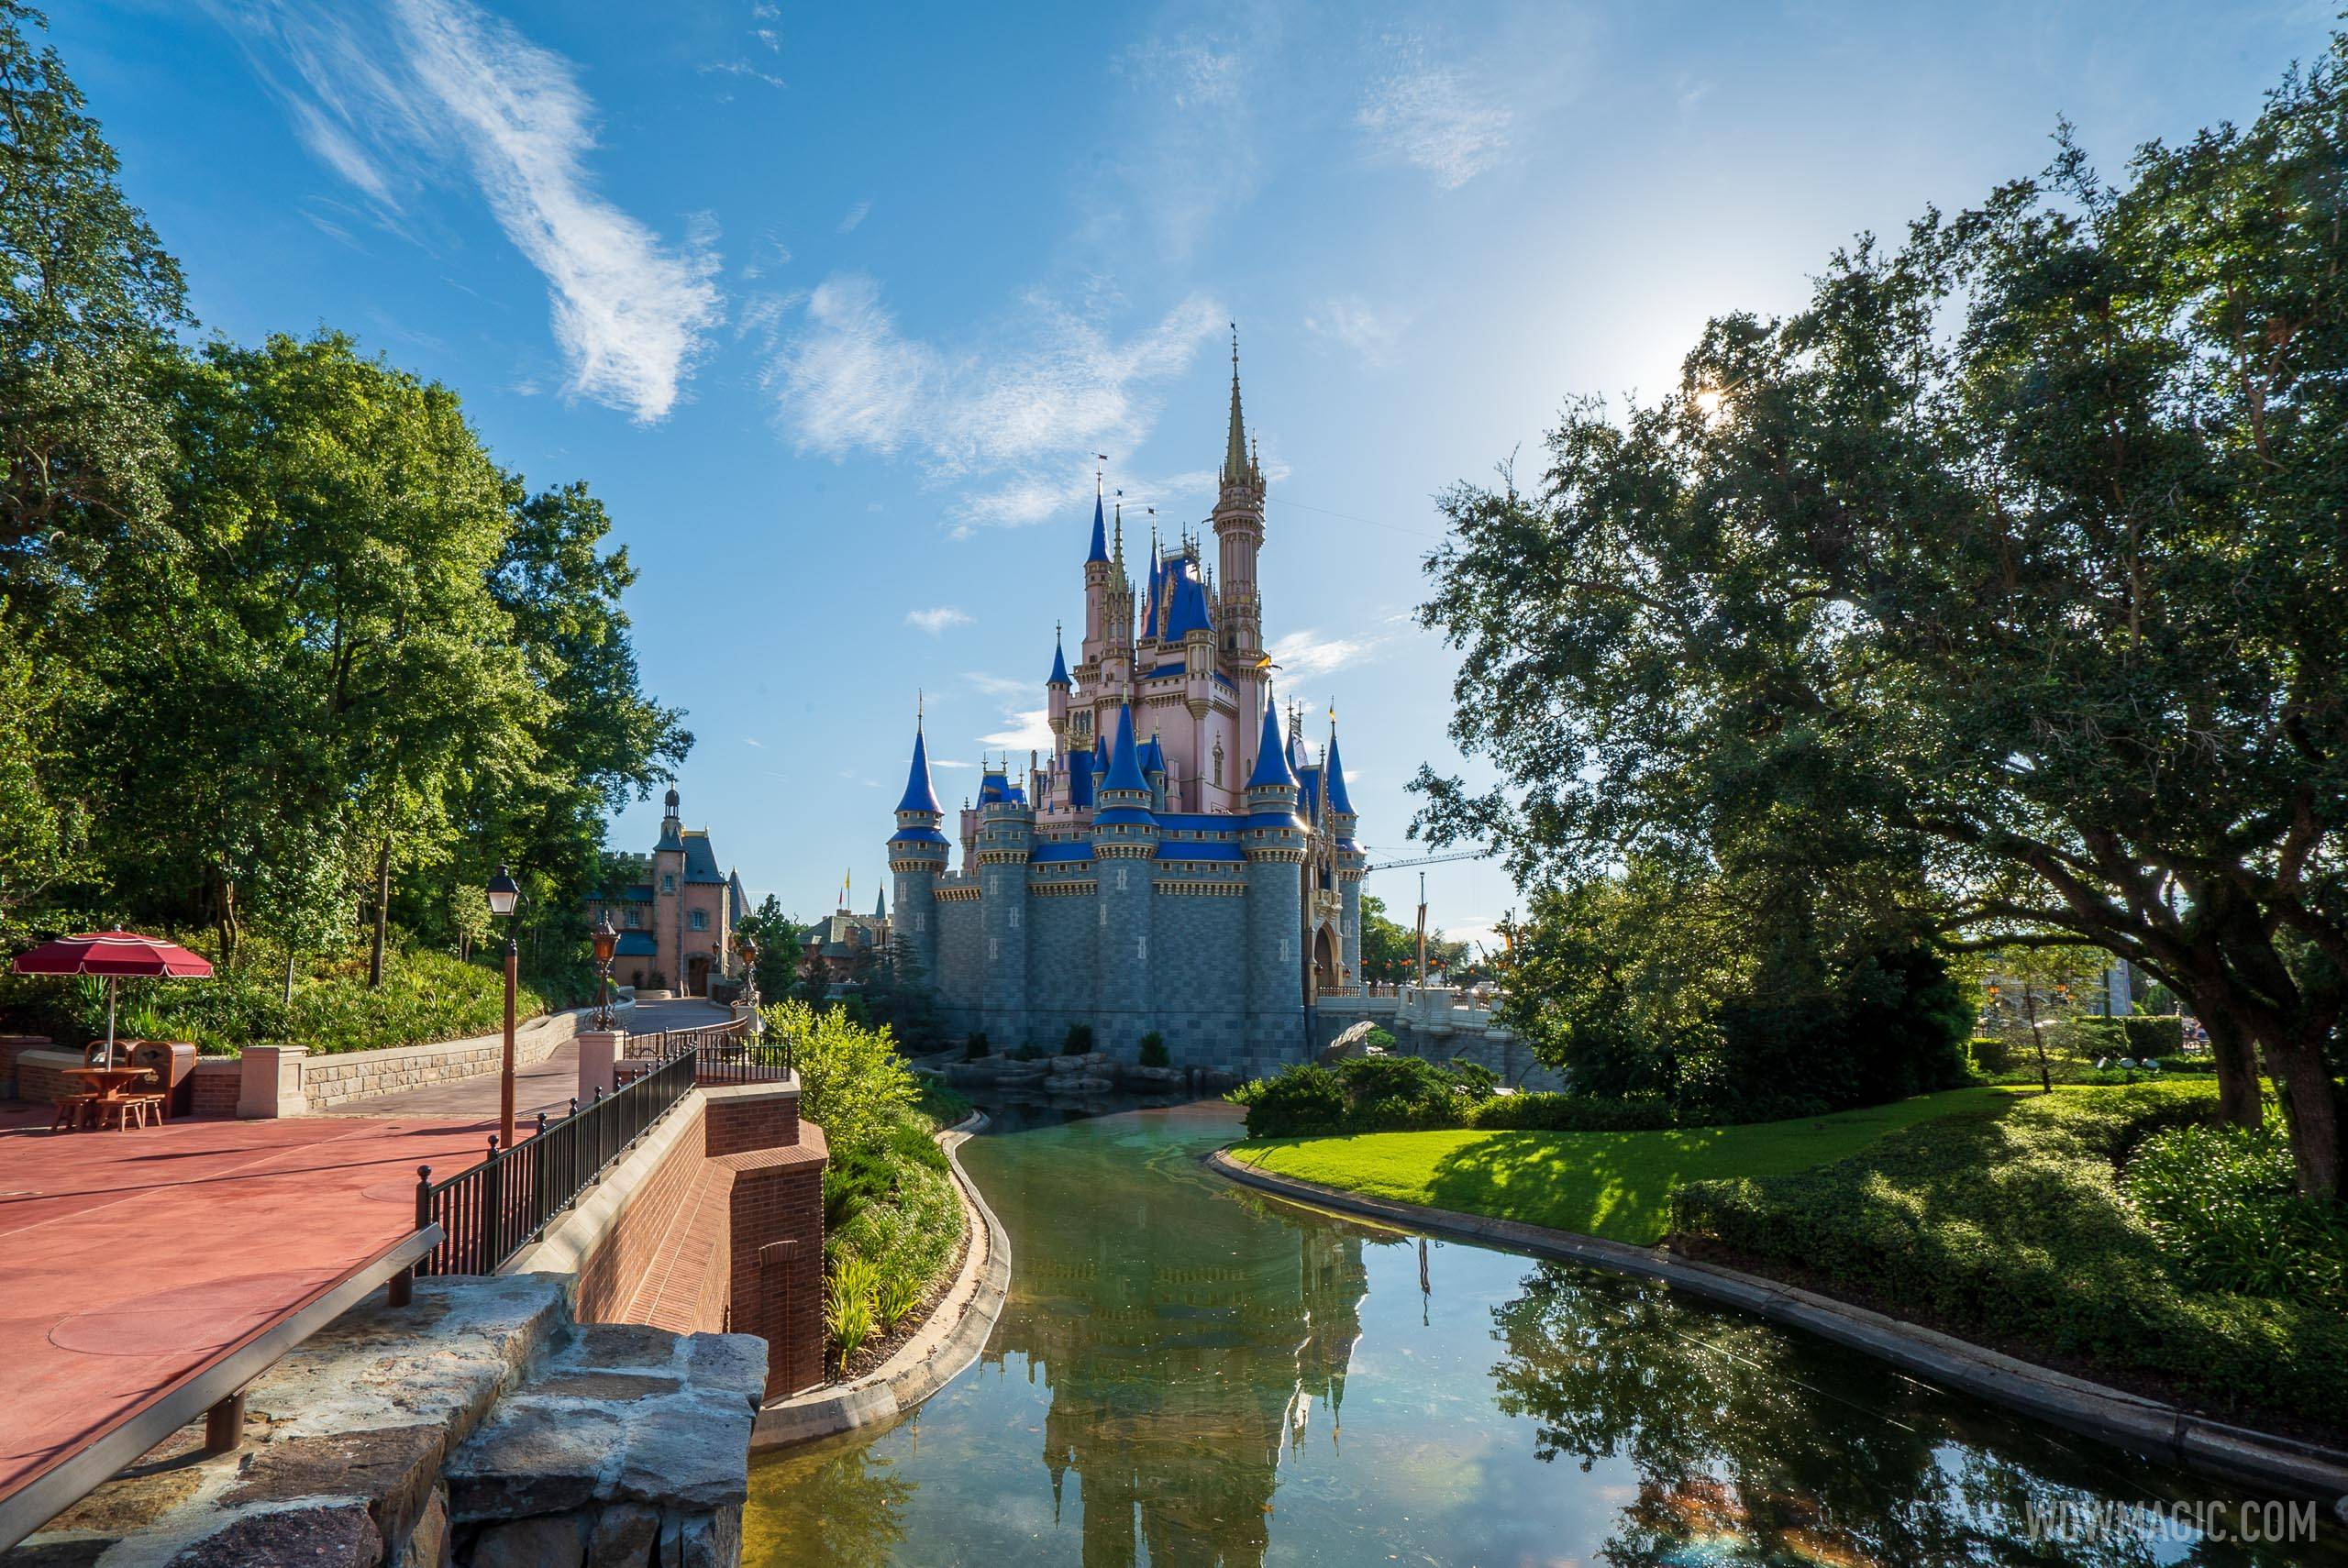 The moat has been refilled as the final step in completing the new look for Cinderella Castle